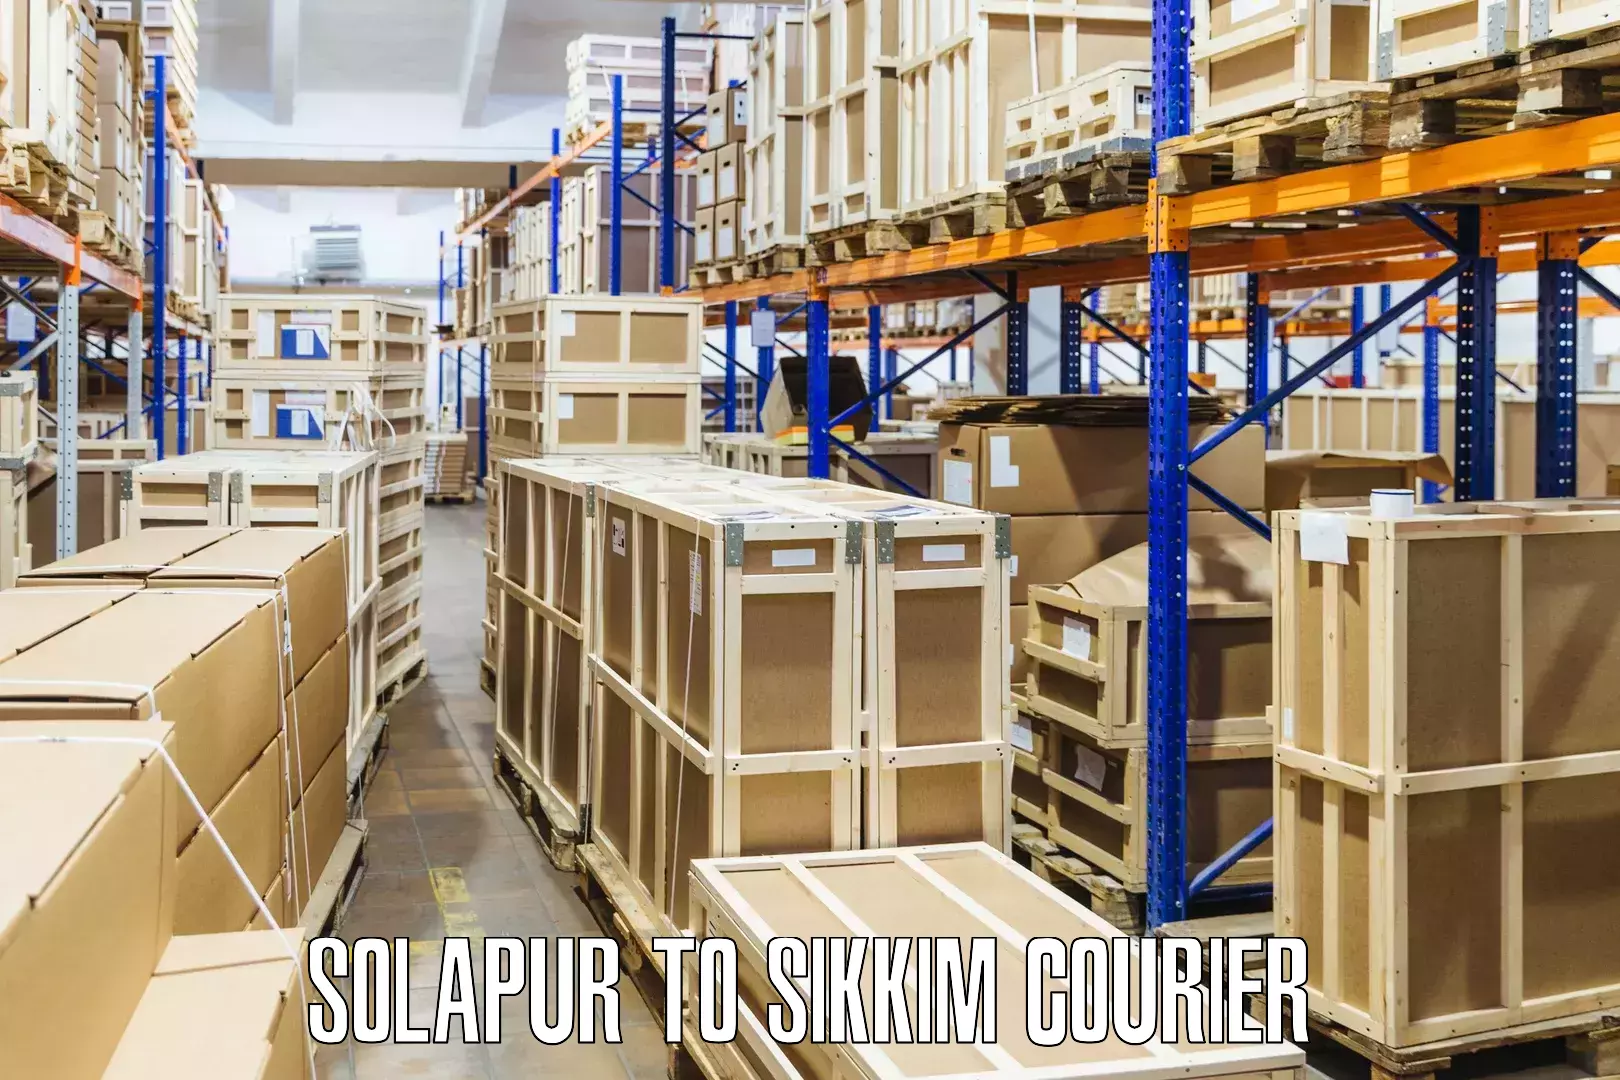 Reliable shipping partners Solapur to Geyzing